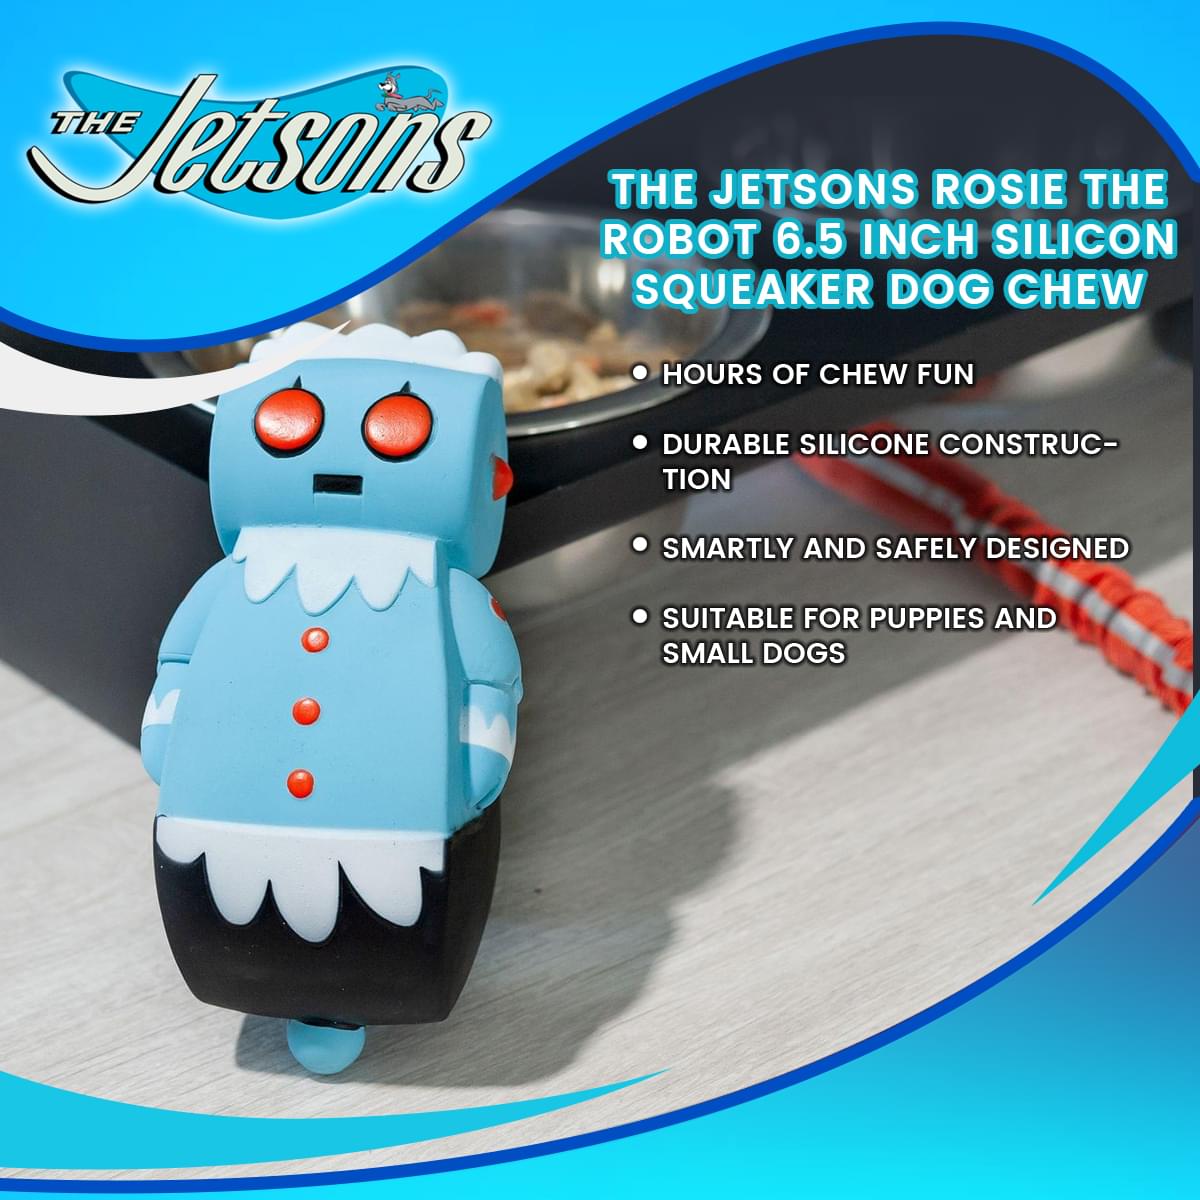 The Jetsons Rosie the Robot 6.5 Inch Silicon Squeaker Dog Chew Toy